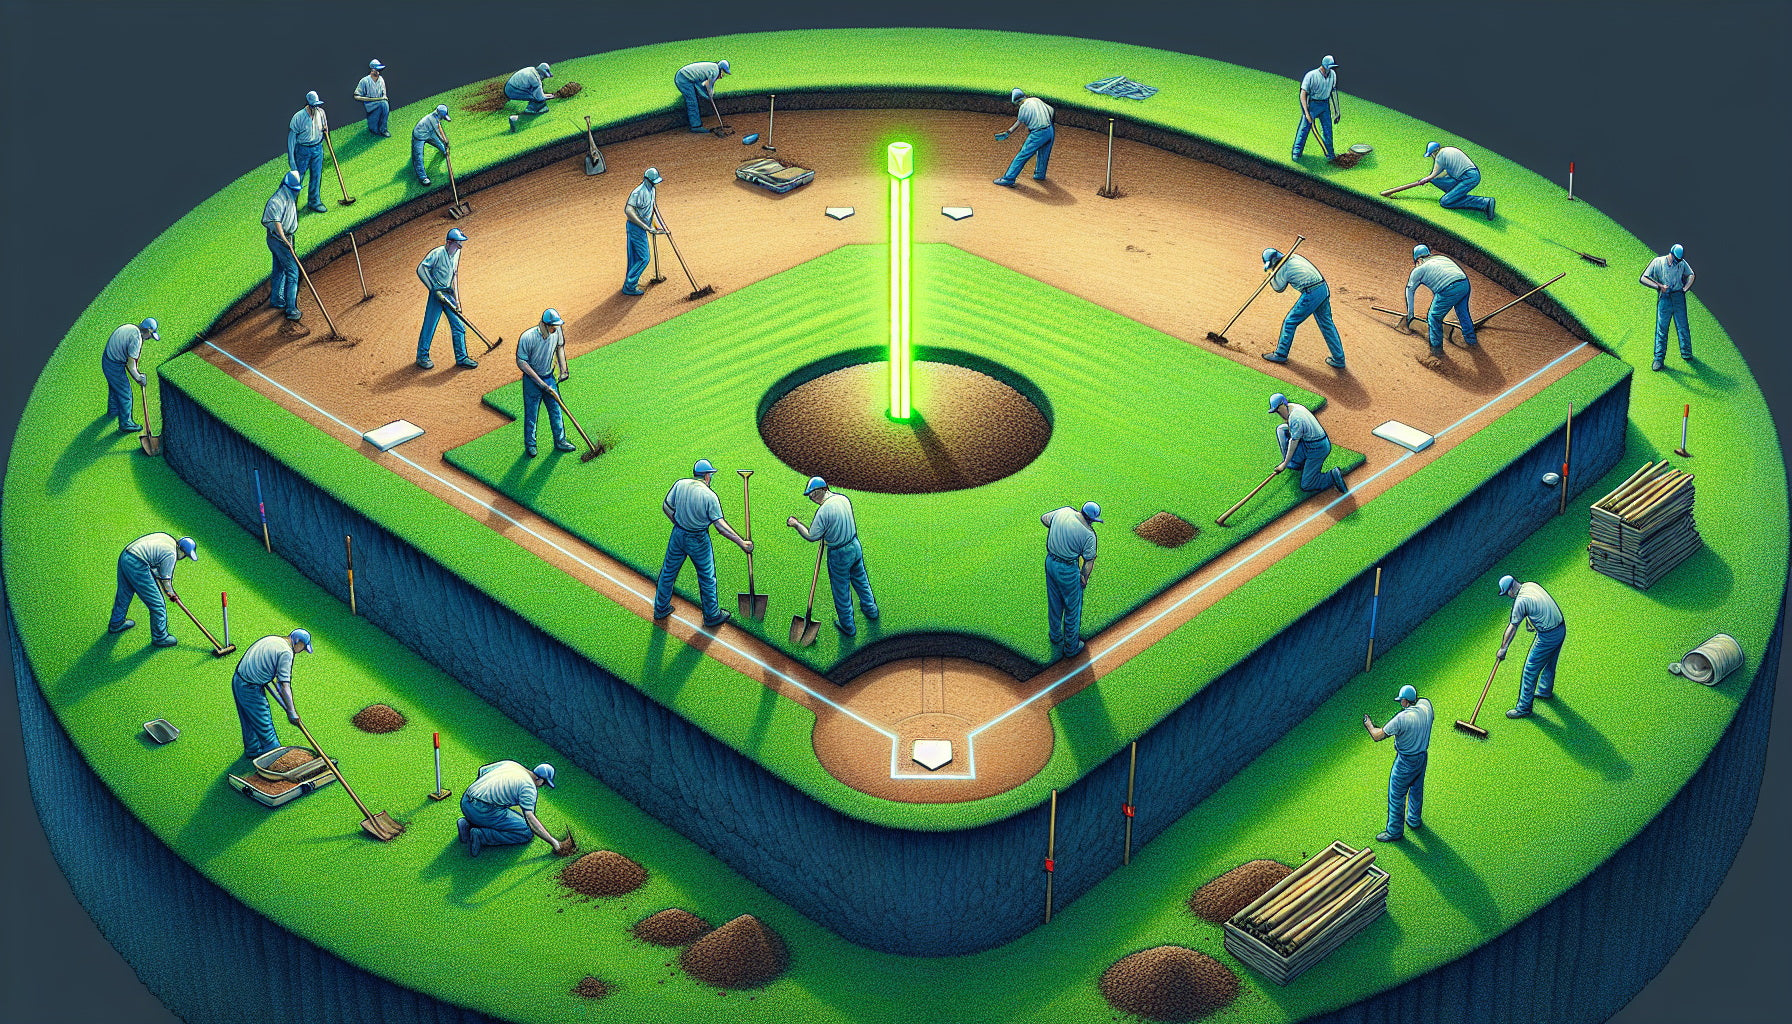 Illustration of leveling the site for pitching mound construction